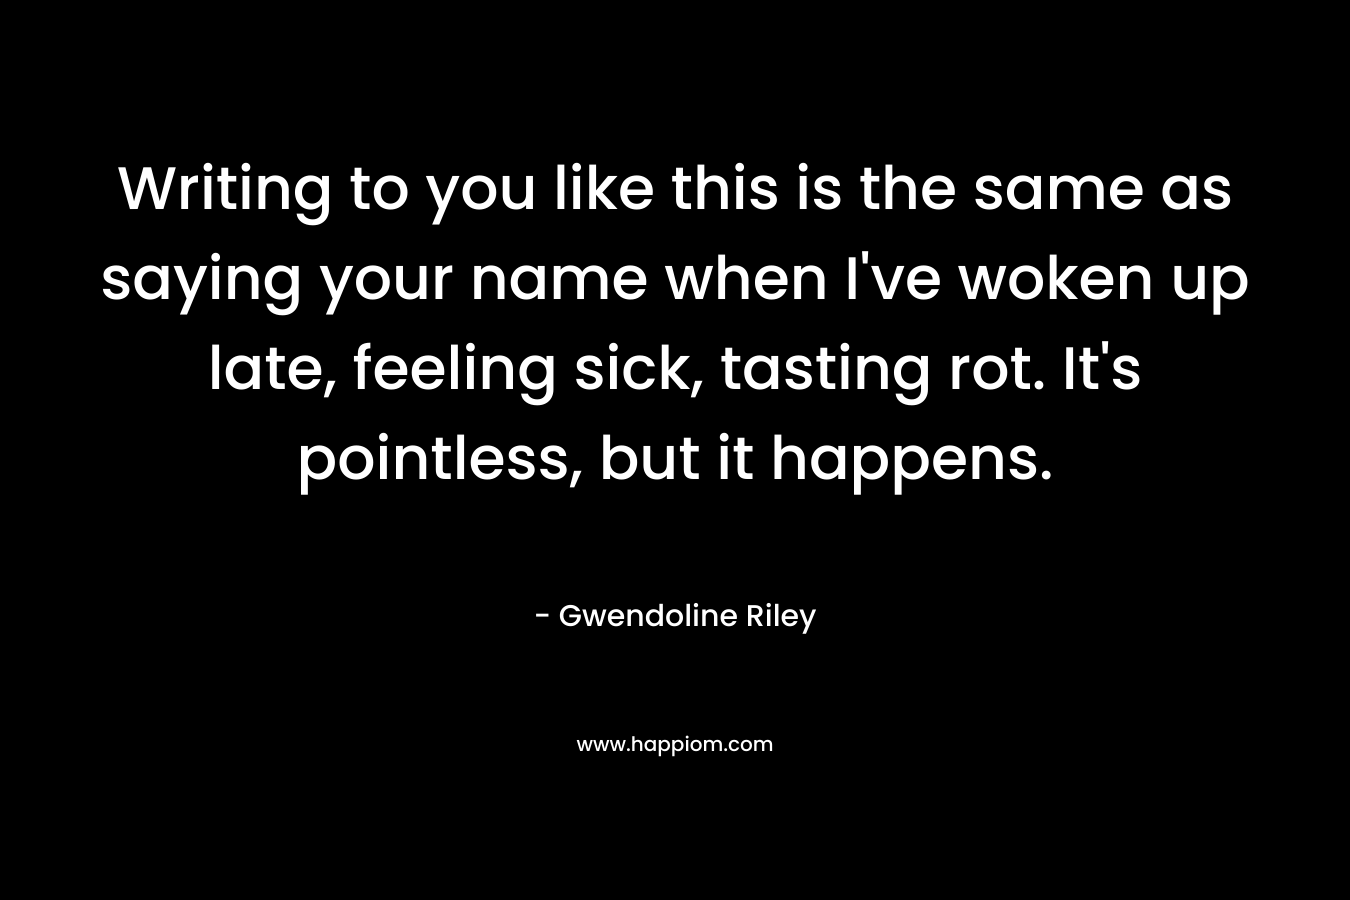 Writing to you like this is the same as saying your name when I’ve woken up late, feeling sick, tasting rot. It’s pointless, but it happens. – Gwendoline Riley